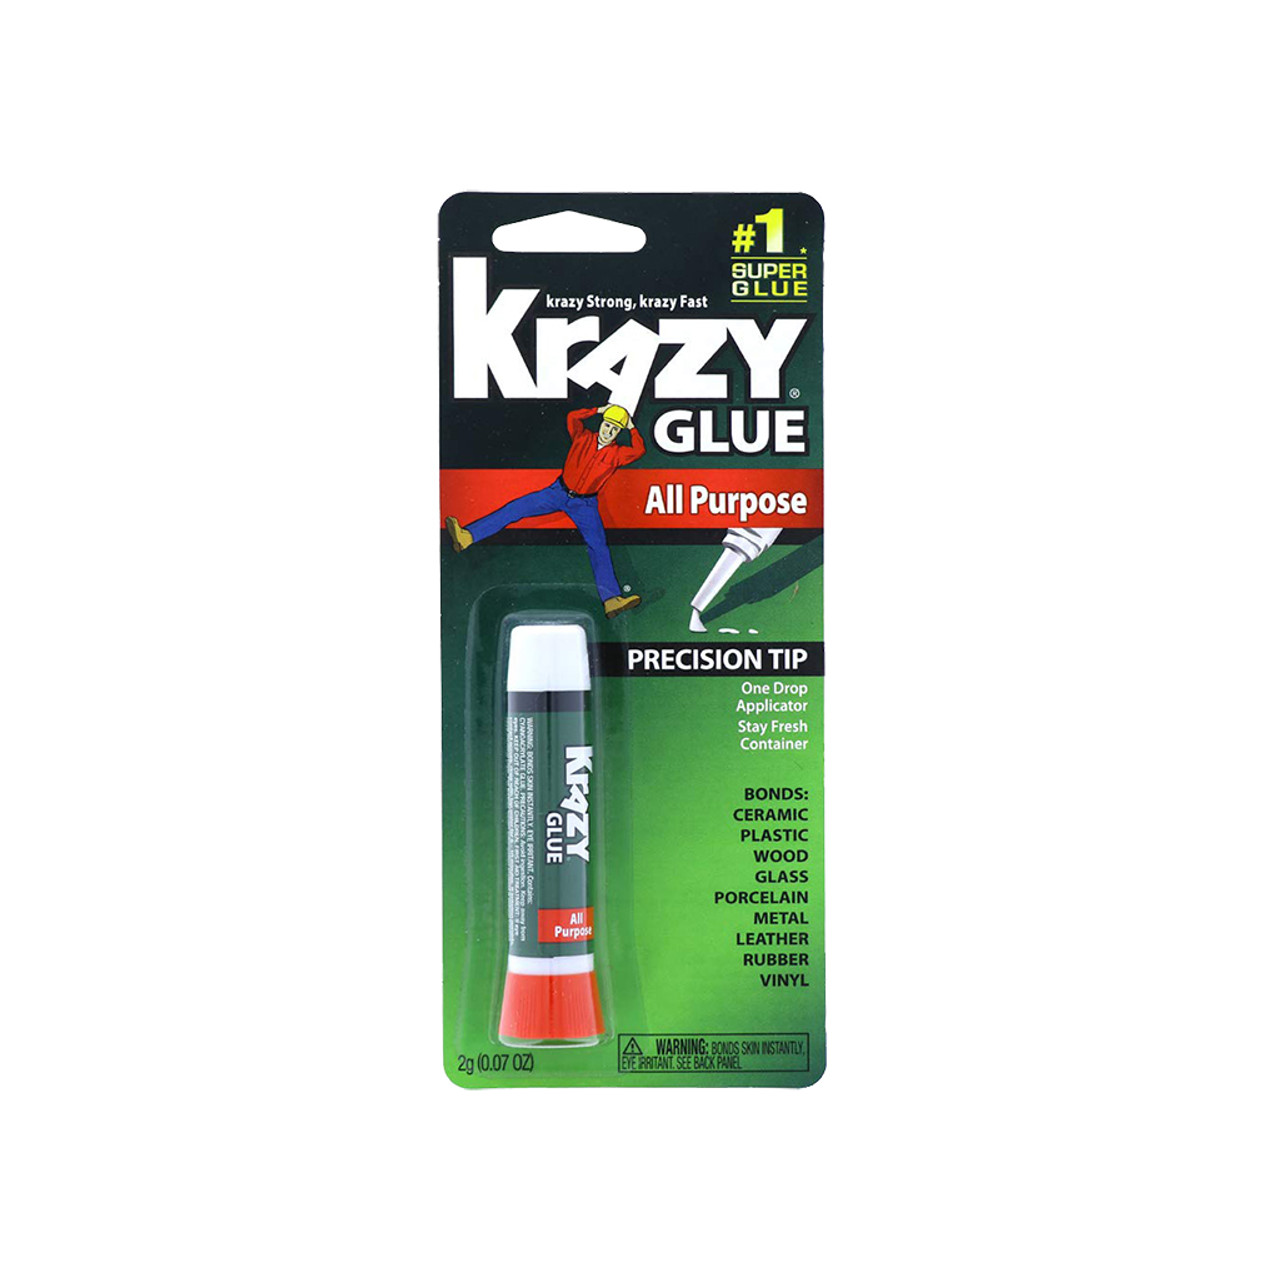 Krazy Glue All Purpose - Midwest Technology Products